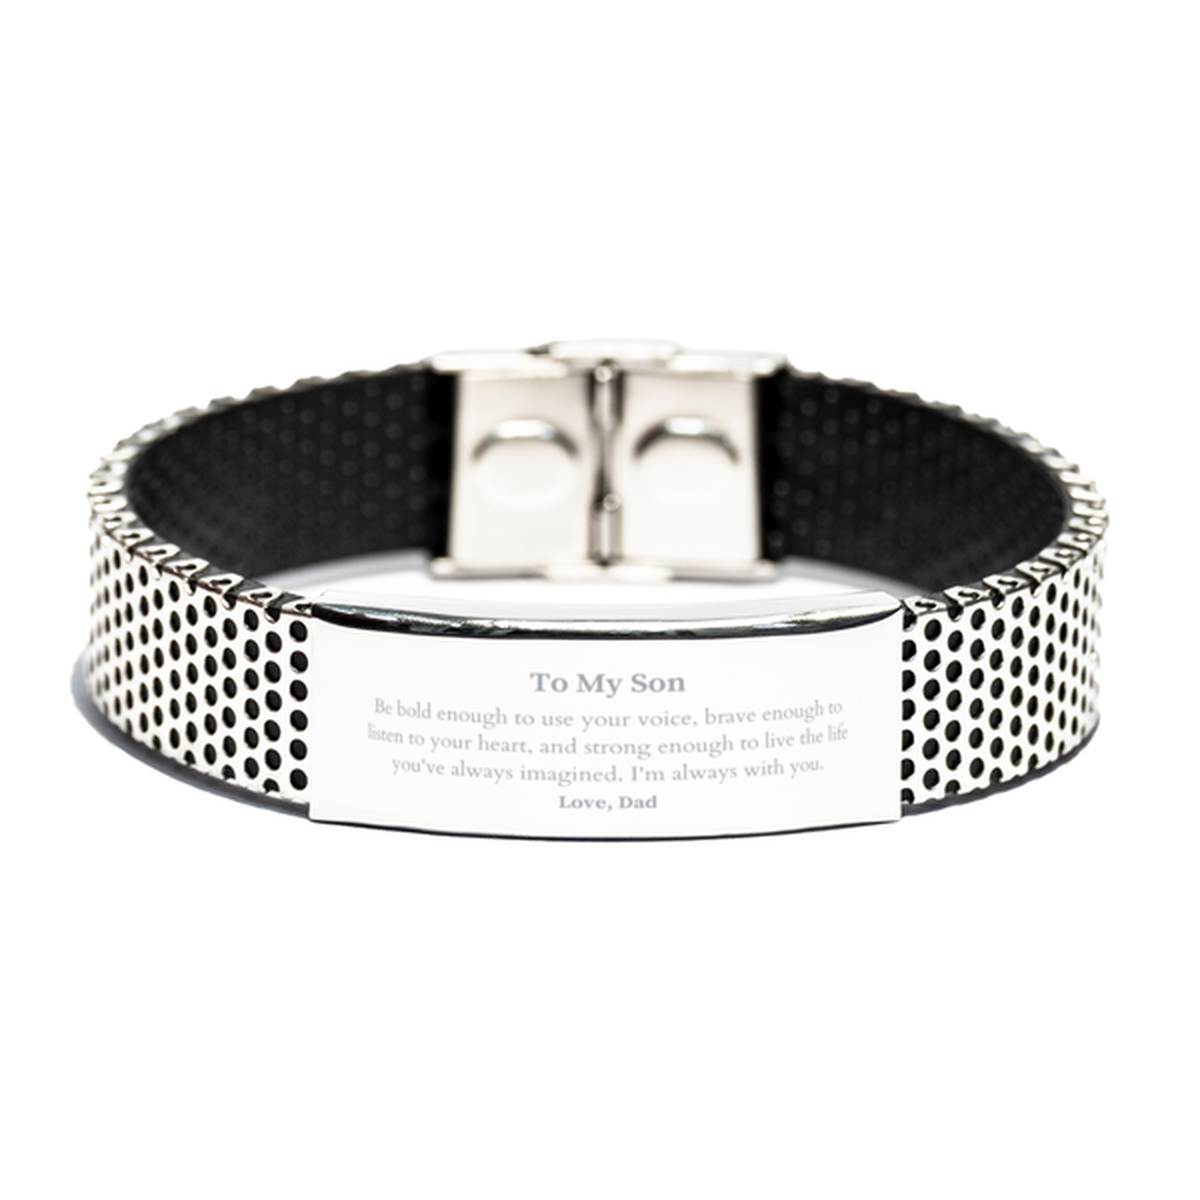 Keepsake Son Stainless Steel Bracelet Gift Idea Graduation Christmas Birthday Son from Dad, Son Be bold enough to use your voice, brave enough to listen to your heart. Love, Dad